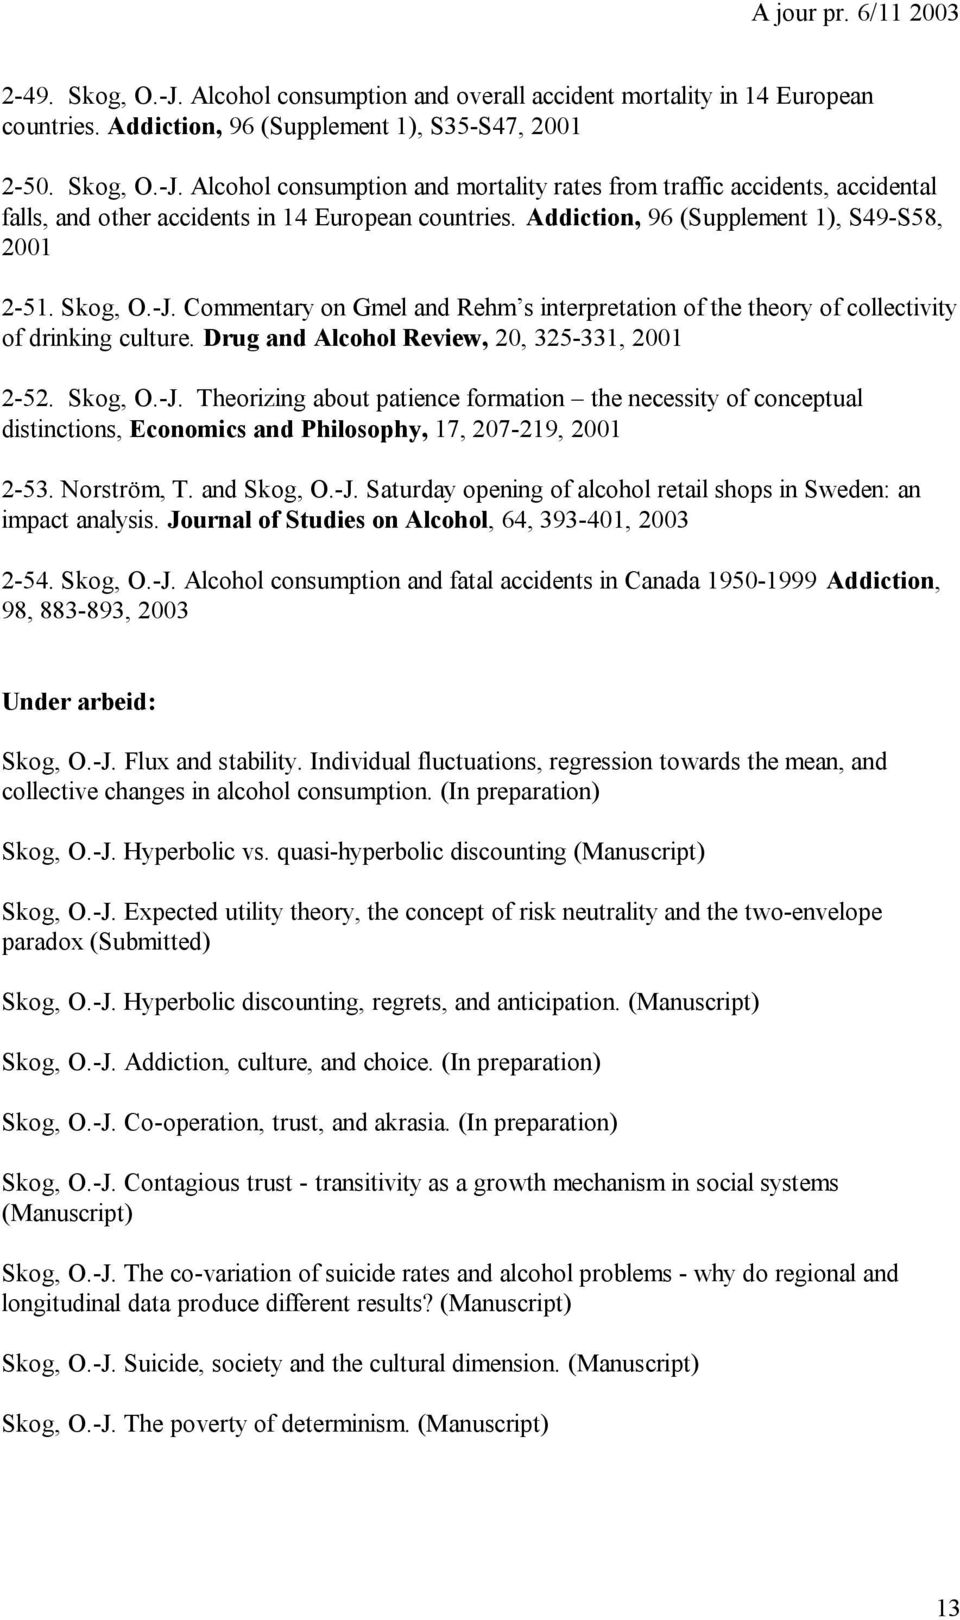 Drug and Alcohol Review, 20, 325-331, 2001 2-52. Skog, O.-J. Theorizing about patience formation the necessity of conceptual distinctions, Economics and Philosophy, 17, 207-219, 2001 2-53.